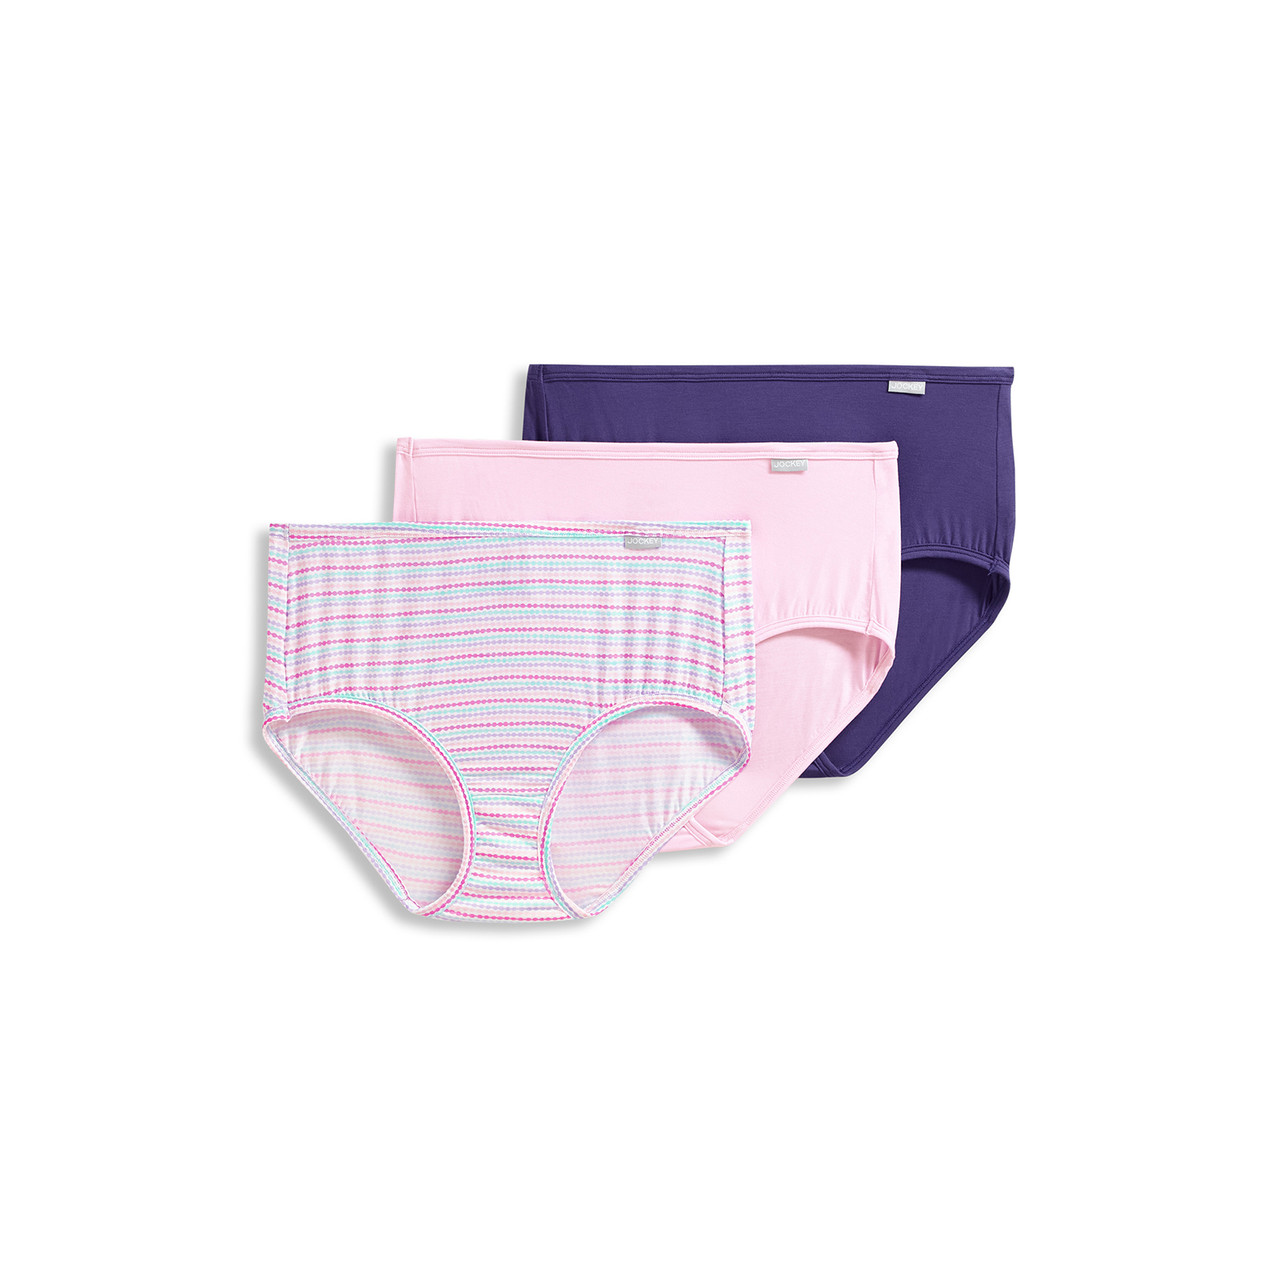 Jockey Women's Underwear Supersoft Hipster - 3 Pack, Black/Light/Ivory, 5 :  : Clothing, Shoes & Accessories